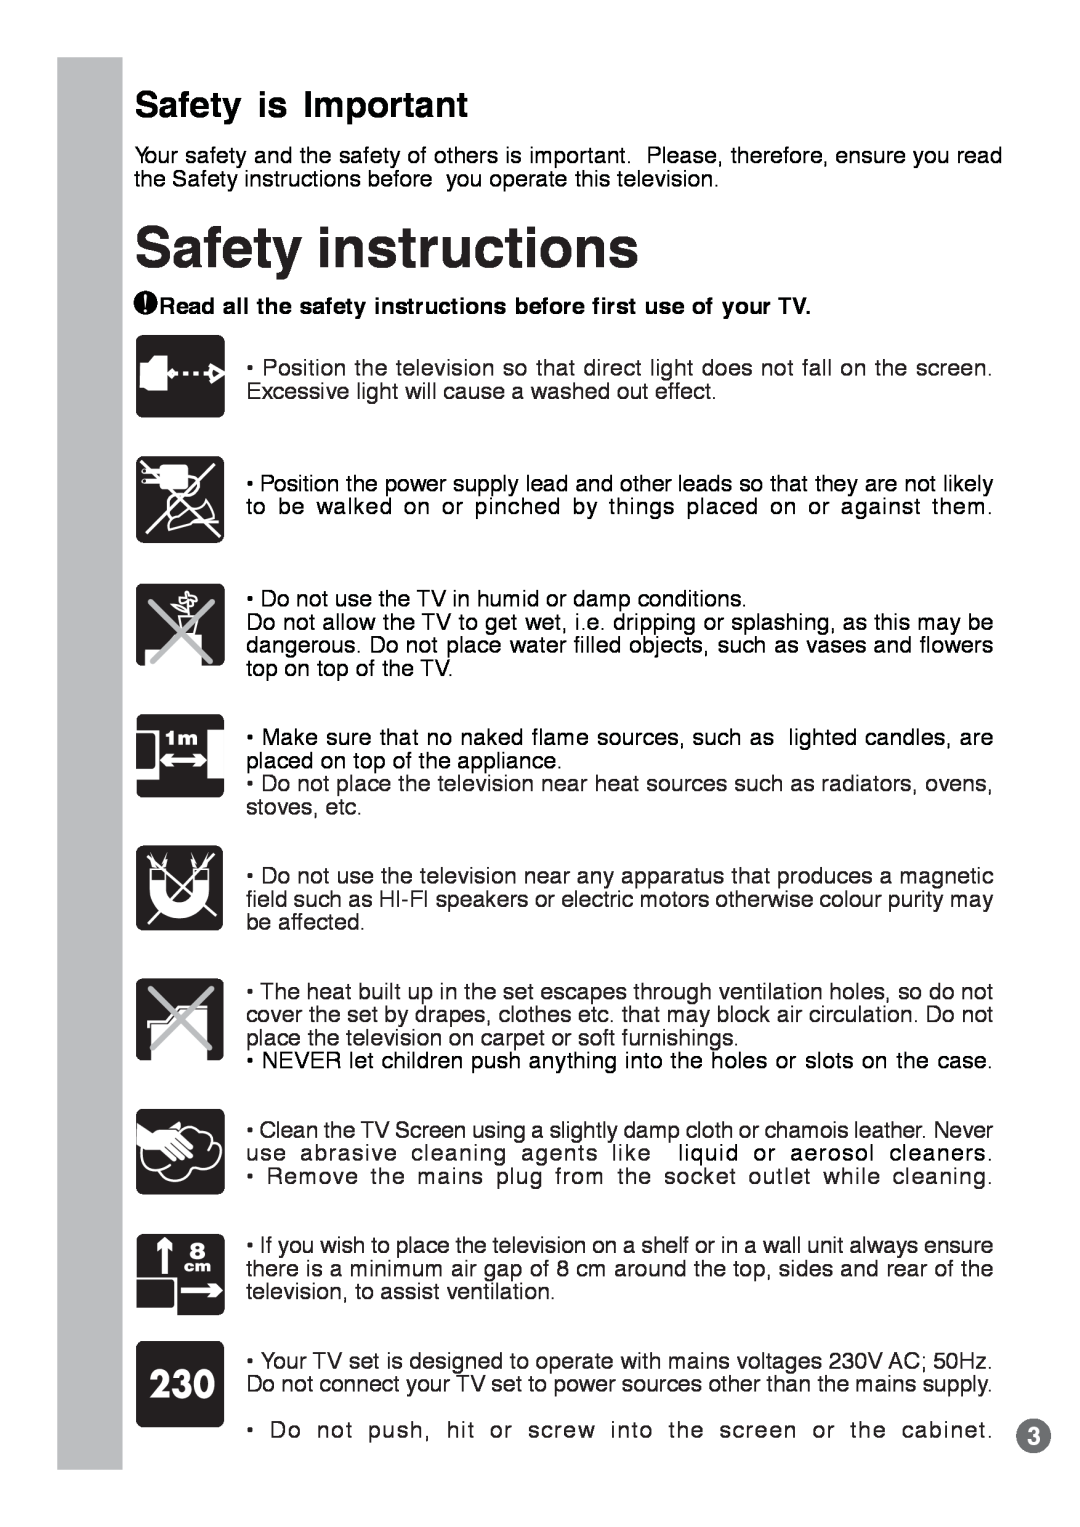 Beko E1 manual Safety instructions, Safety is Important, Read all the safety instructions before first use of your TV 